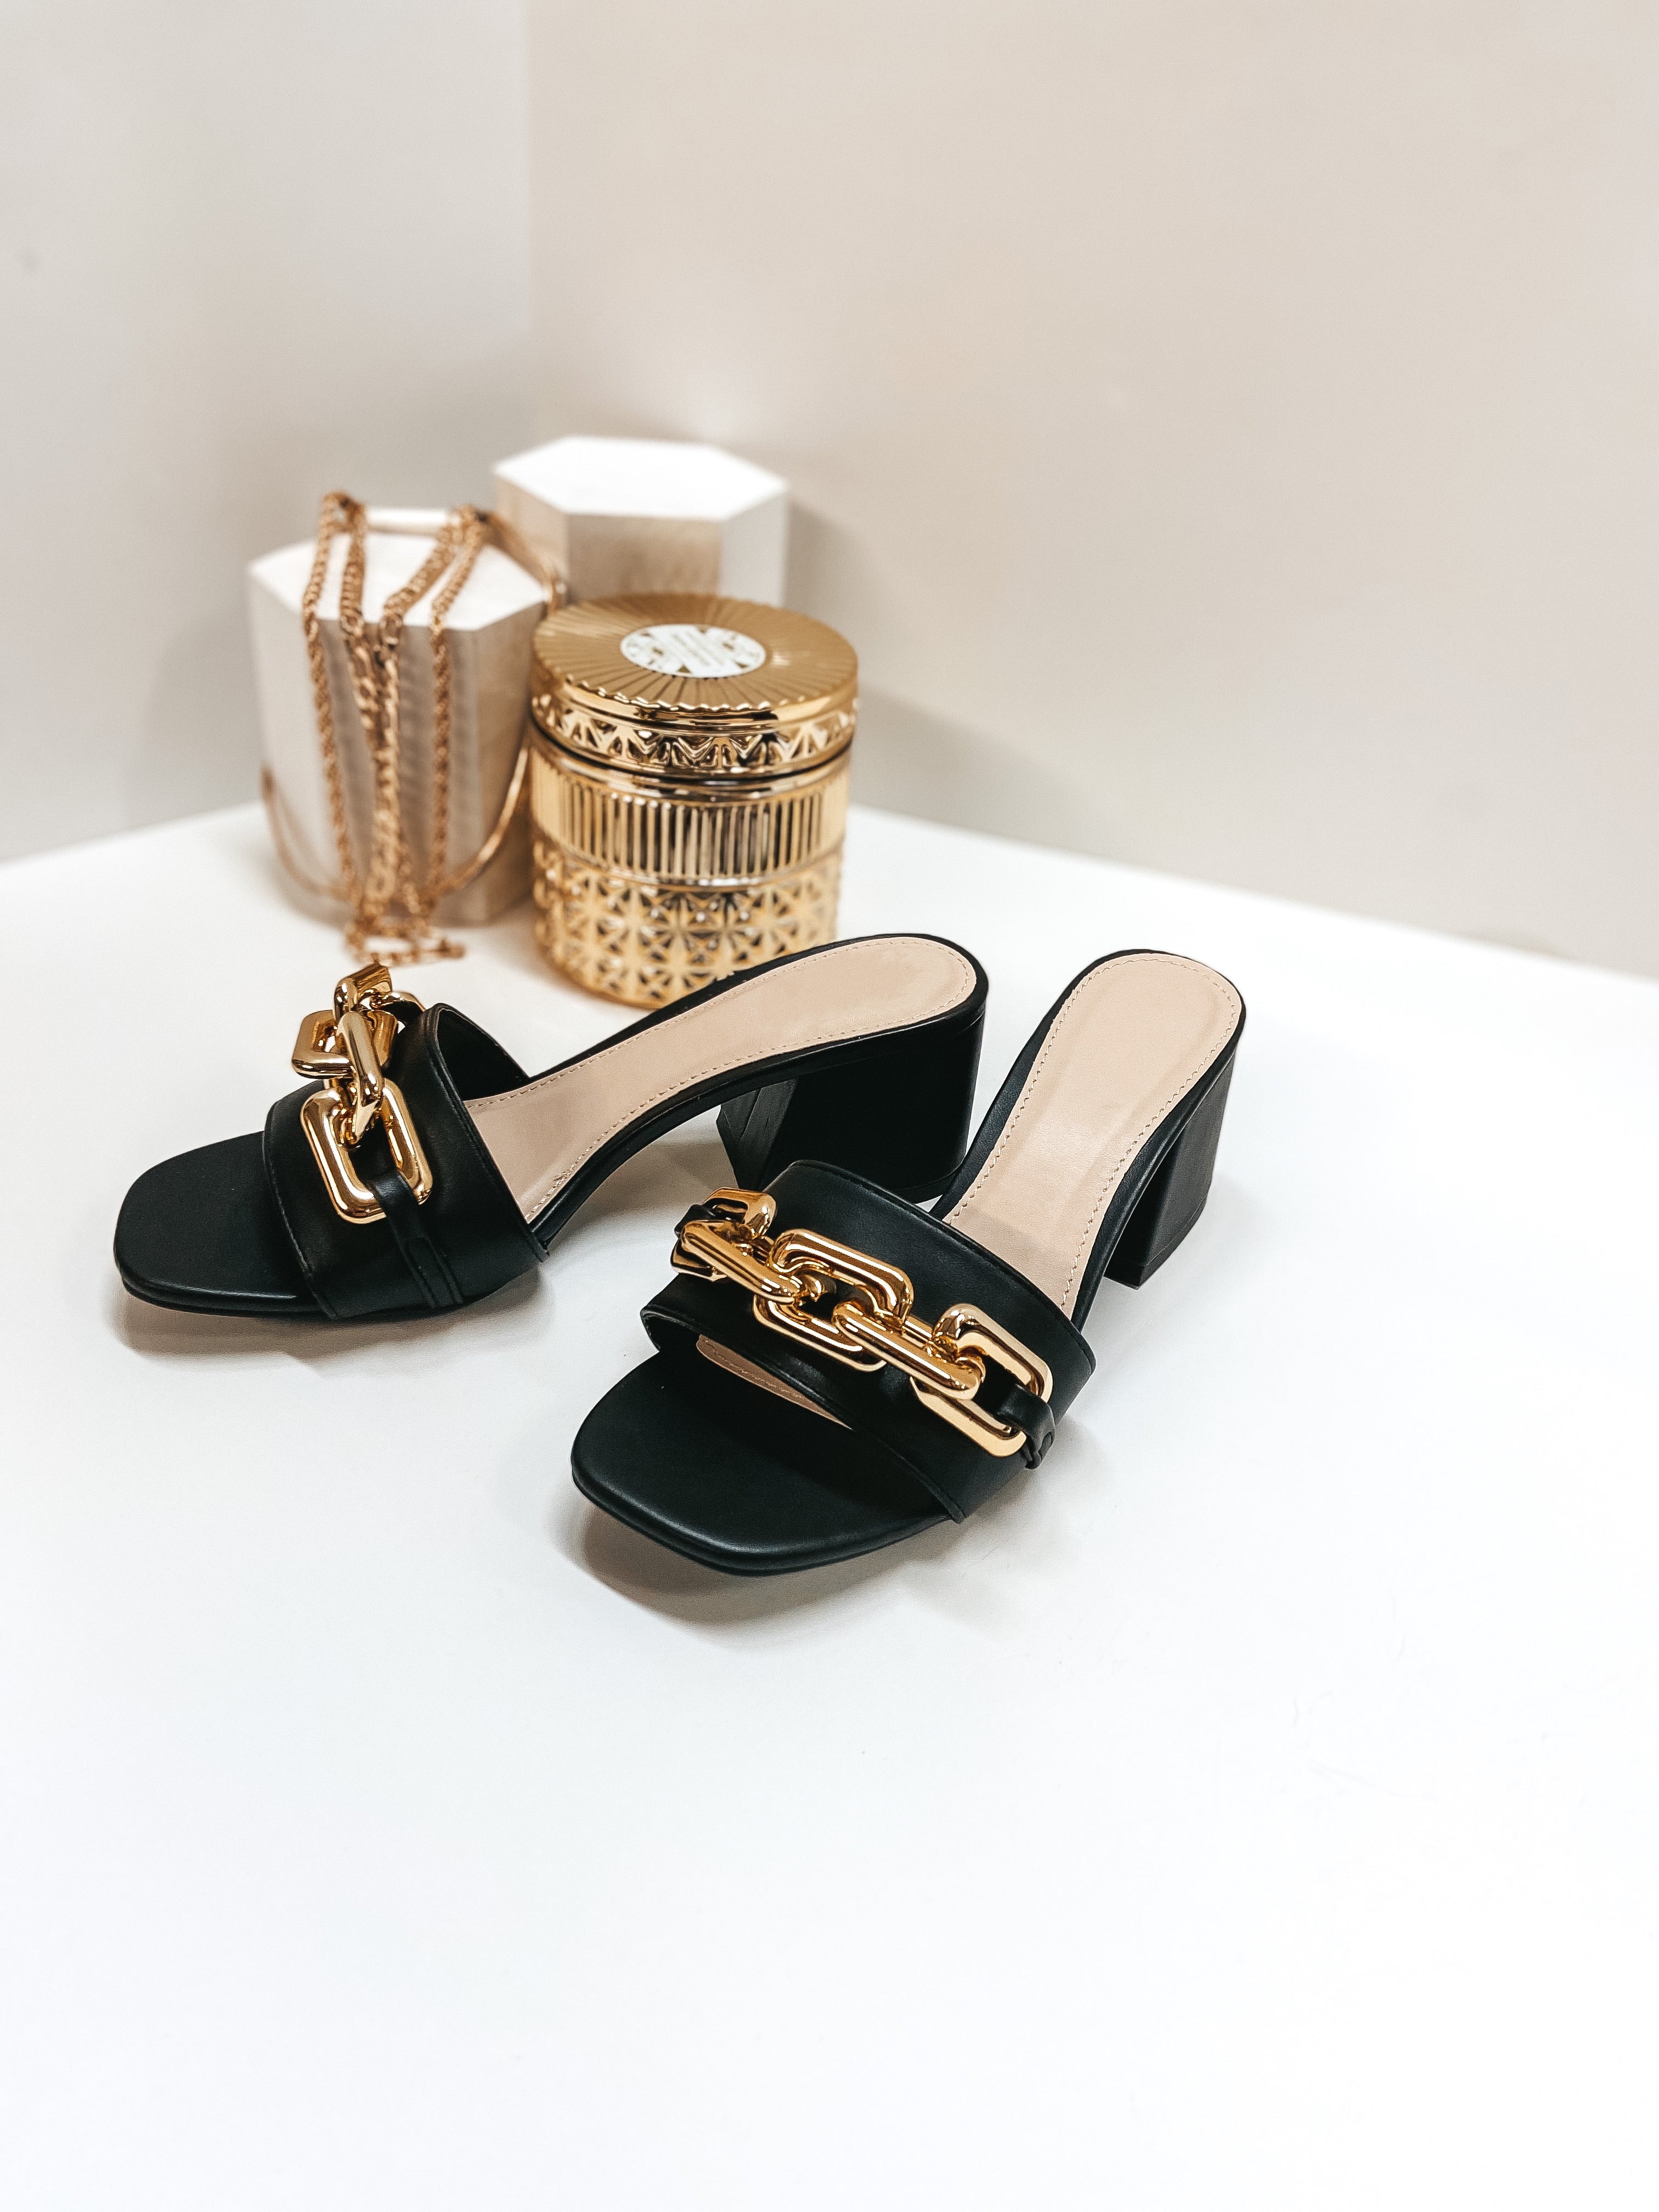 Grand Entrance Gold Chain Mini Block Heels in Black - Giddy Up Glamour Boutique